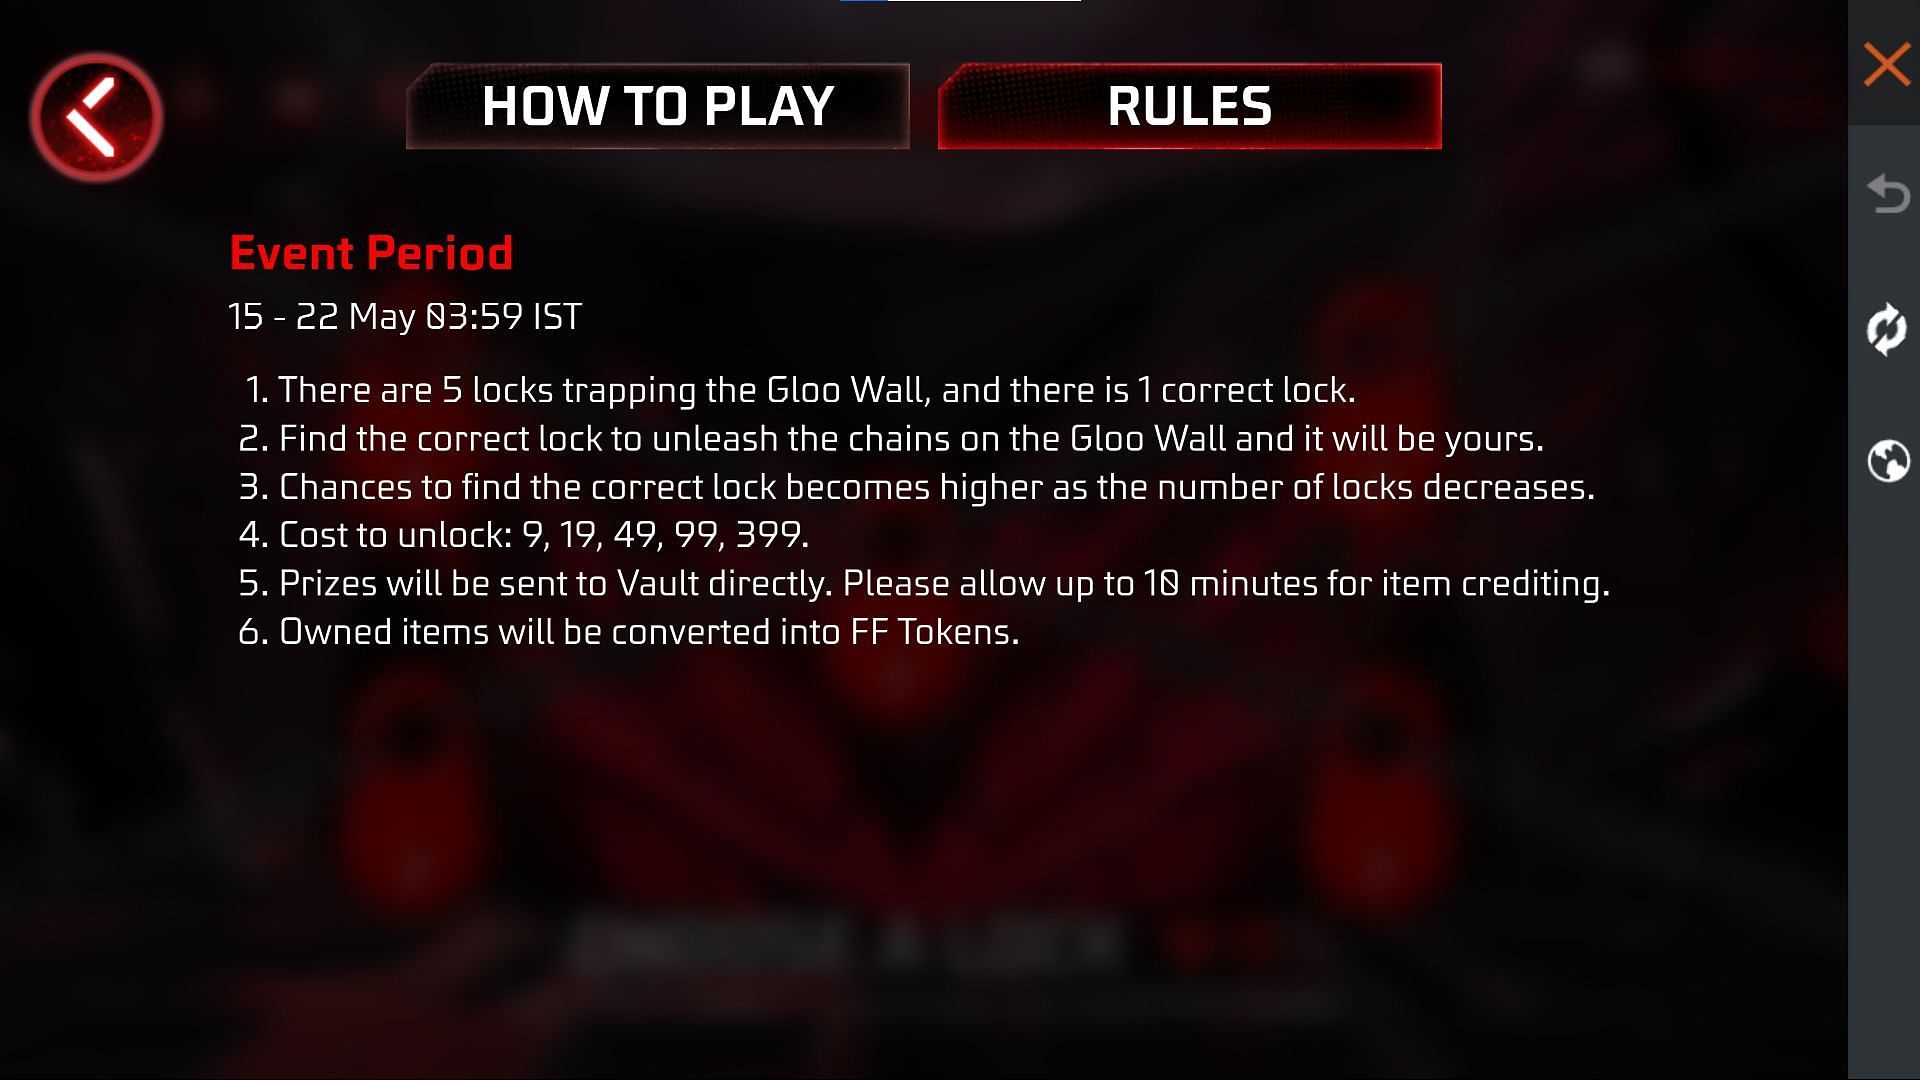 The event rules and cost to unlock (Image via Garena)